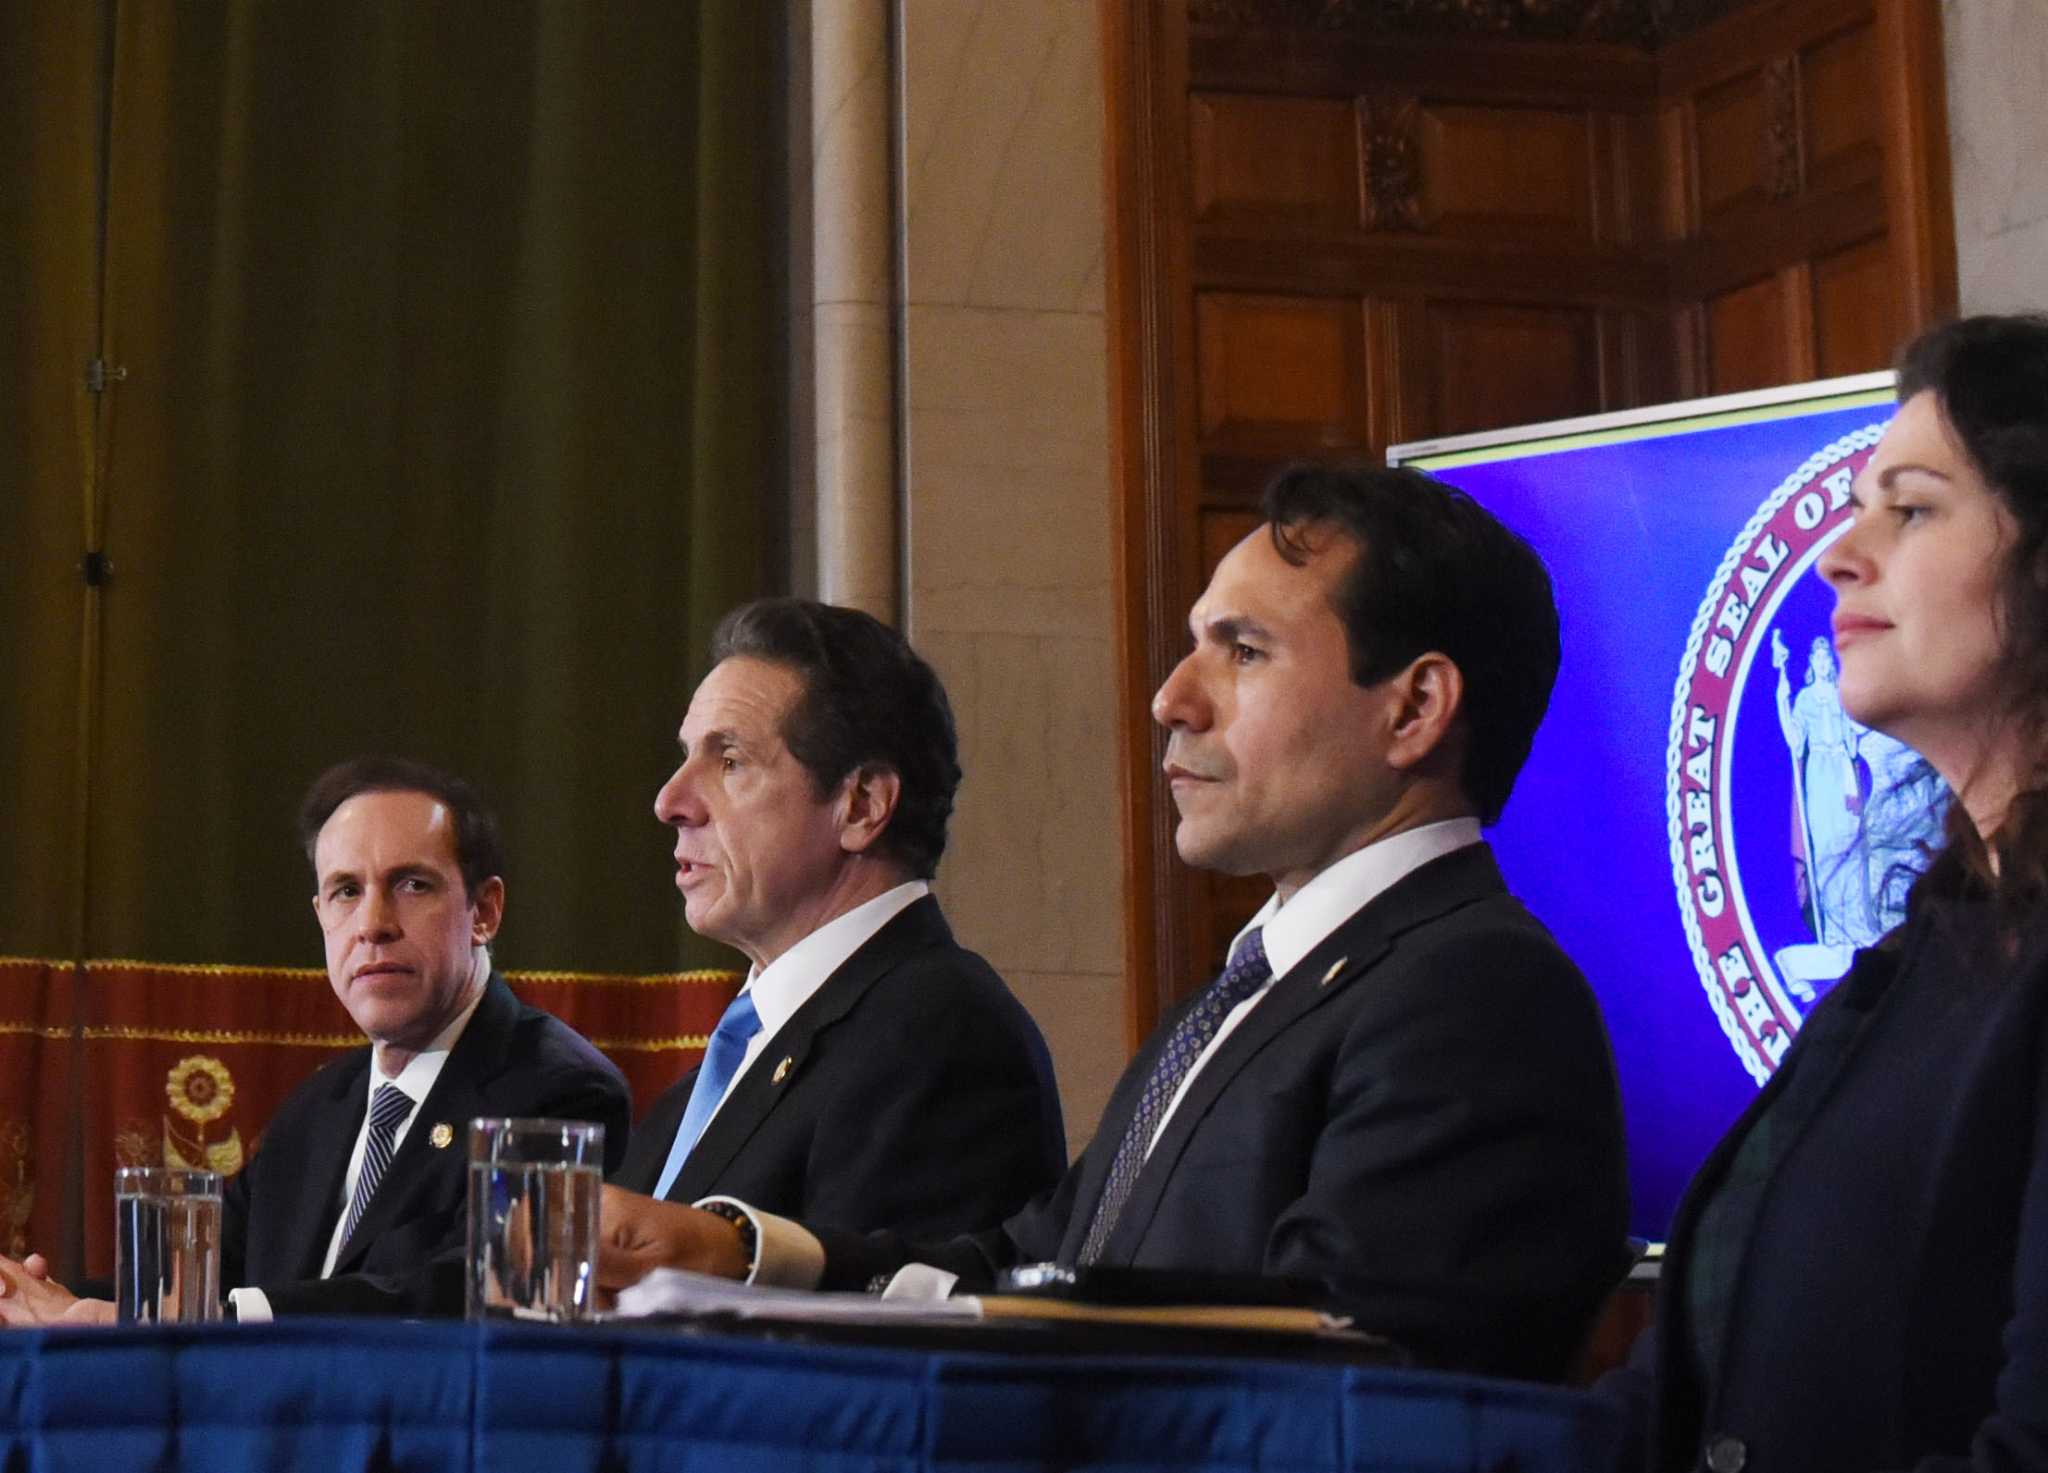 Cuomo office conducting its own ‘investigation’ of groping allegations